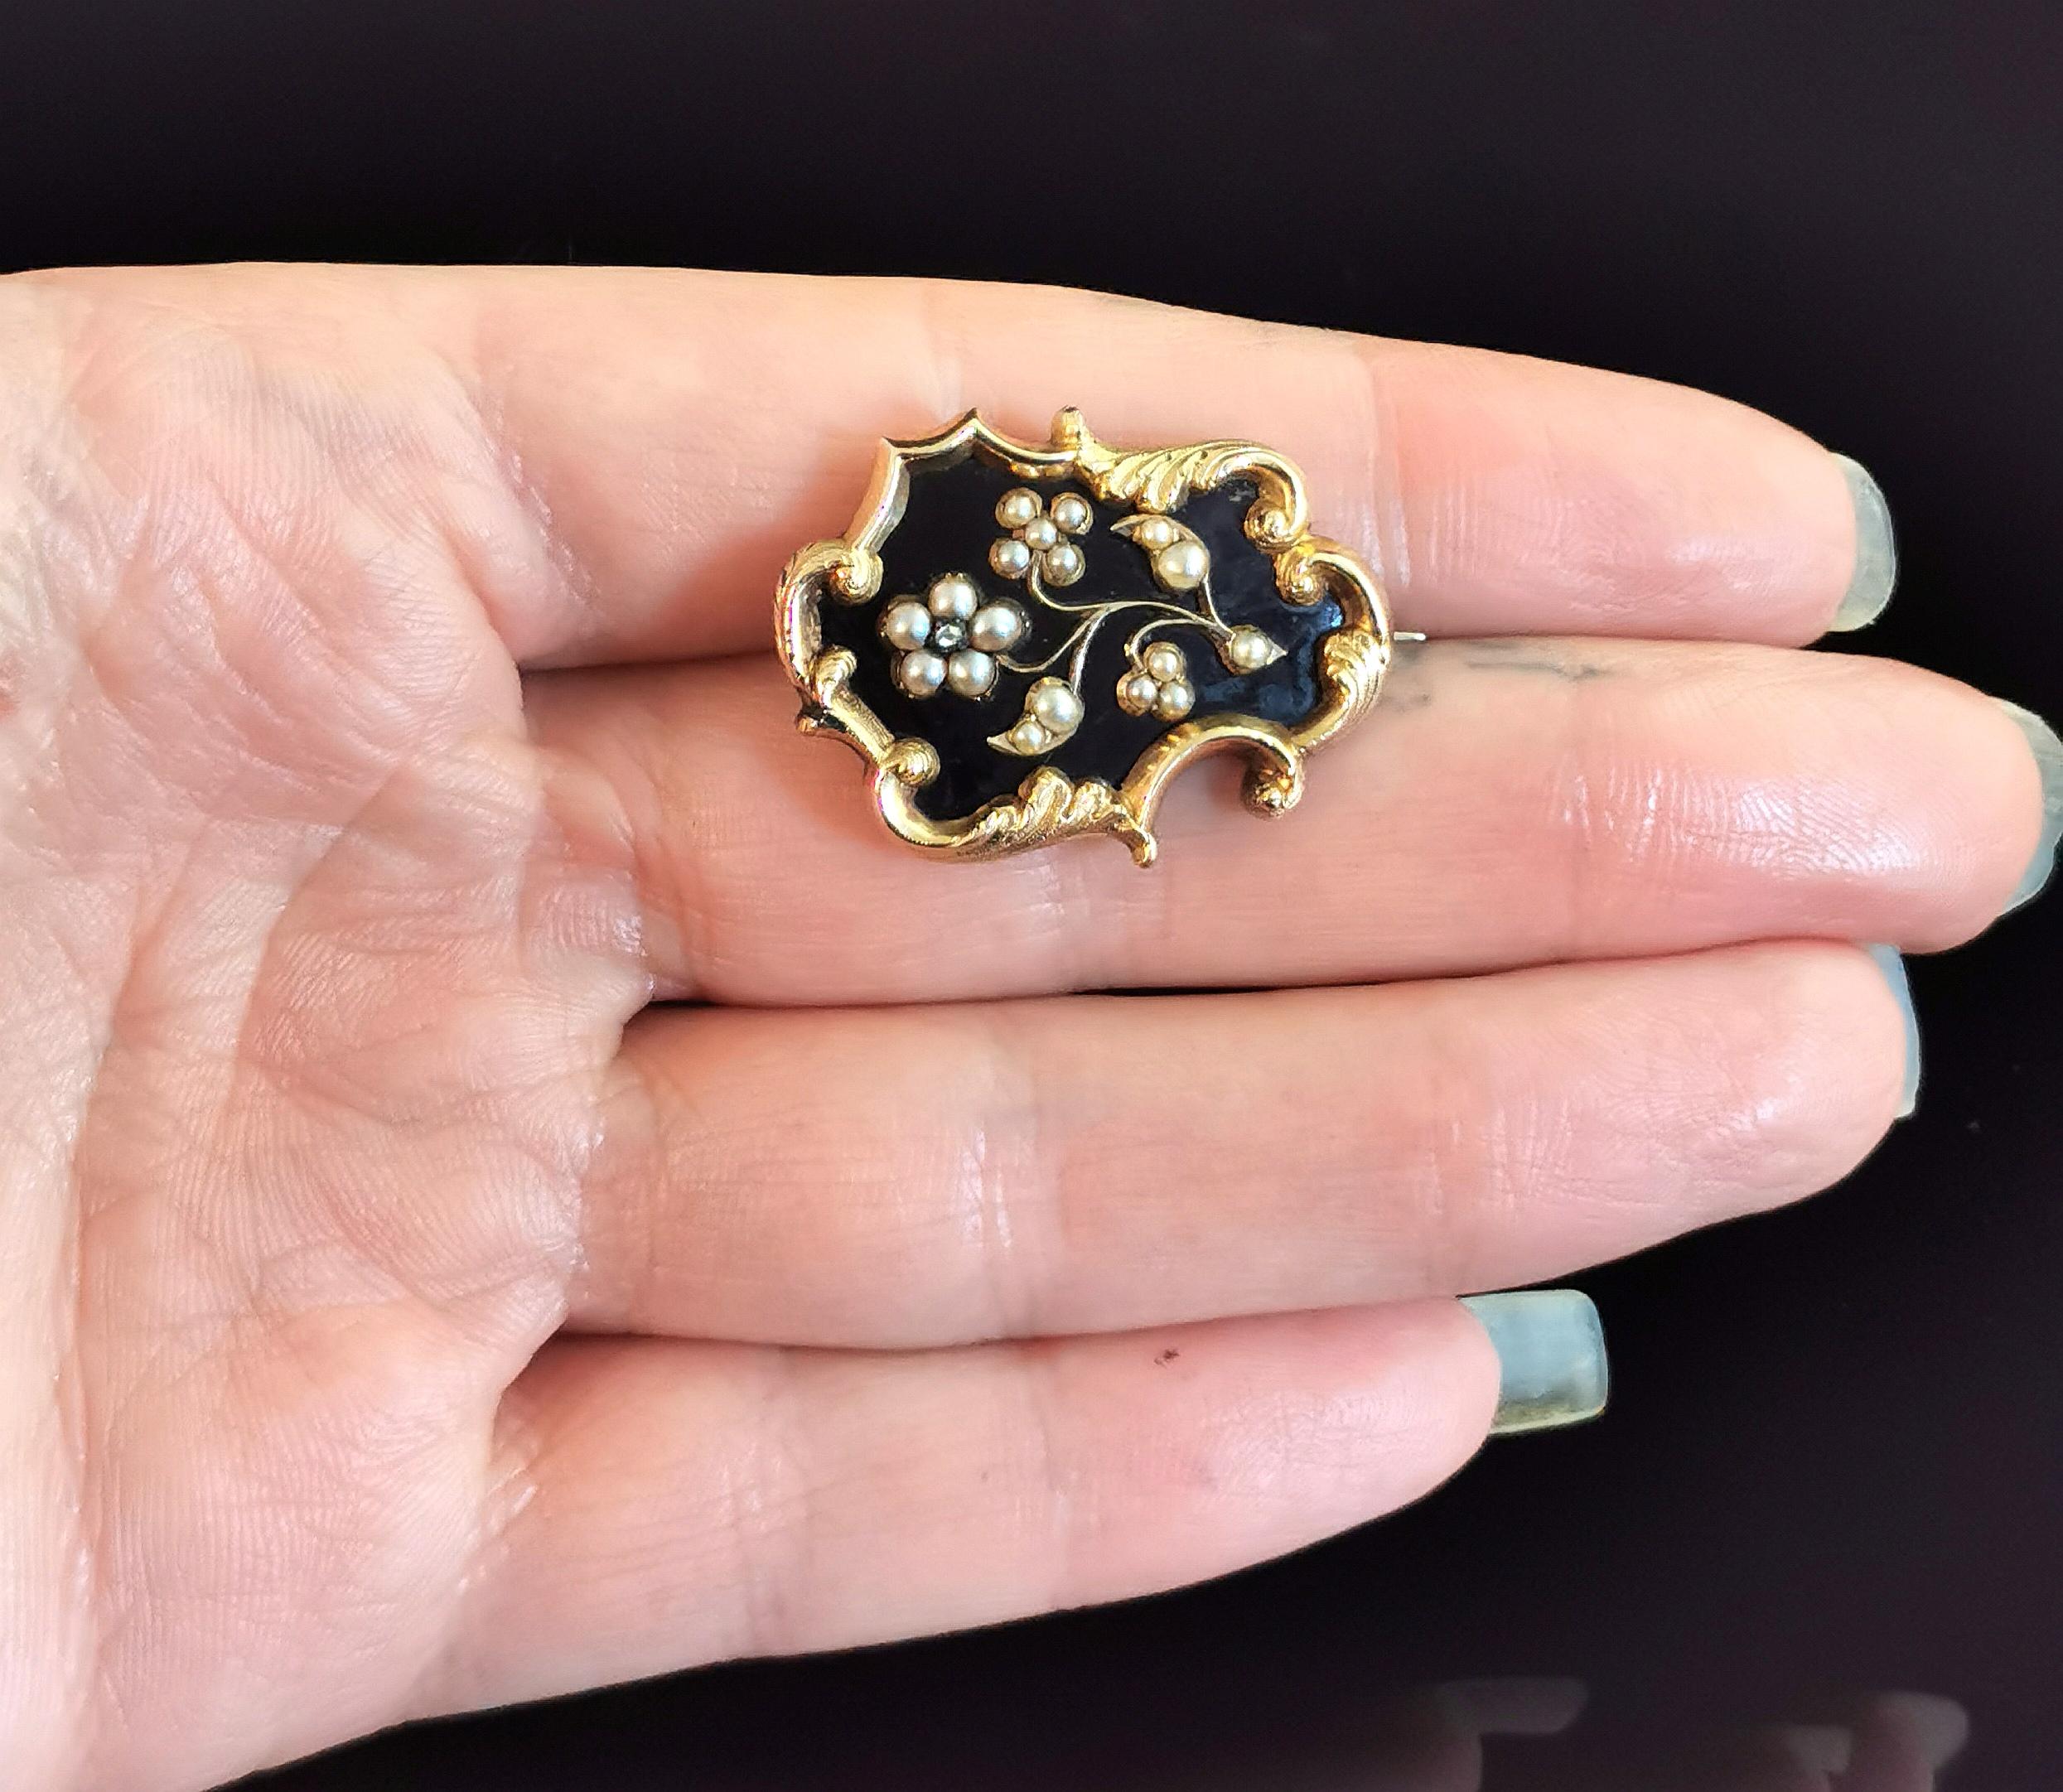 Early Victorian Antique Mourning Brooch, Forget Me Not Flower, Black Enamel, 9k Gold, Diamond